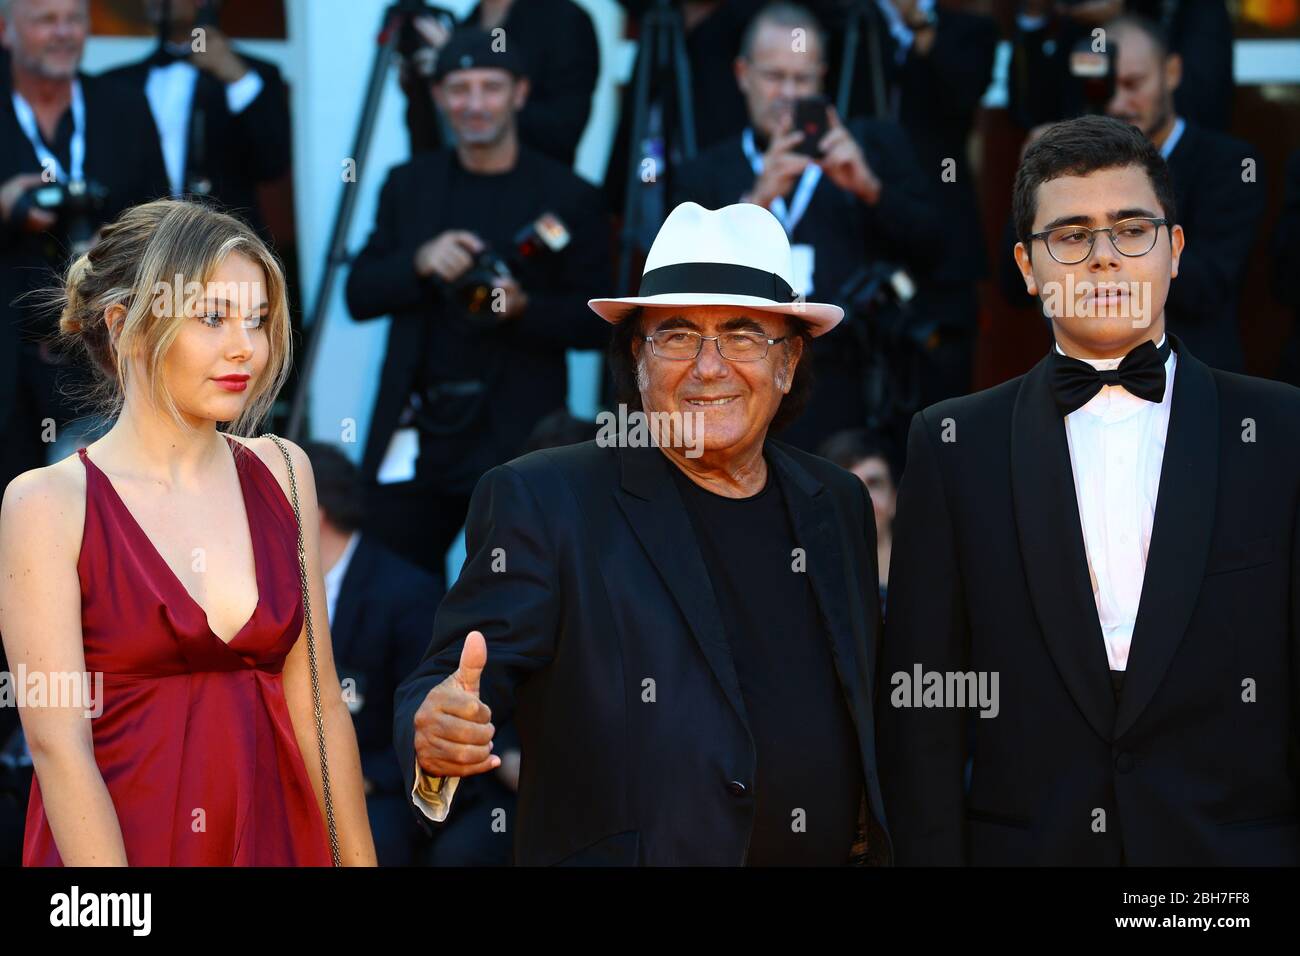 VENICE, ITALY - SEPTEMBER 04:  Al Bano, Jasmine Carrisi and AlBano Carrisi Jr walks the red carpet of the 'Vox Lux' screening Stock Photo